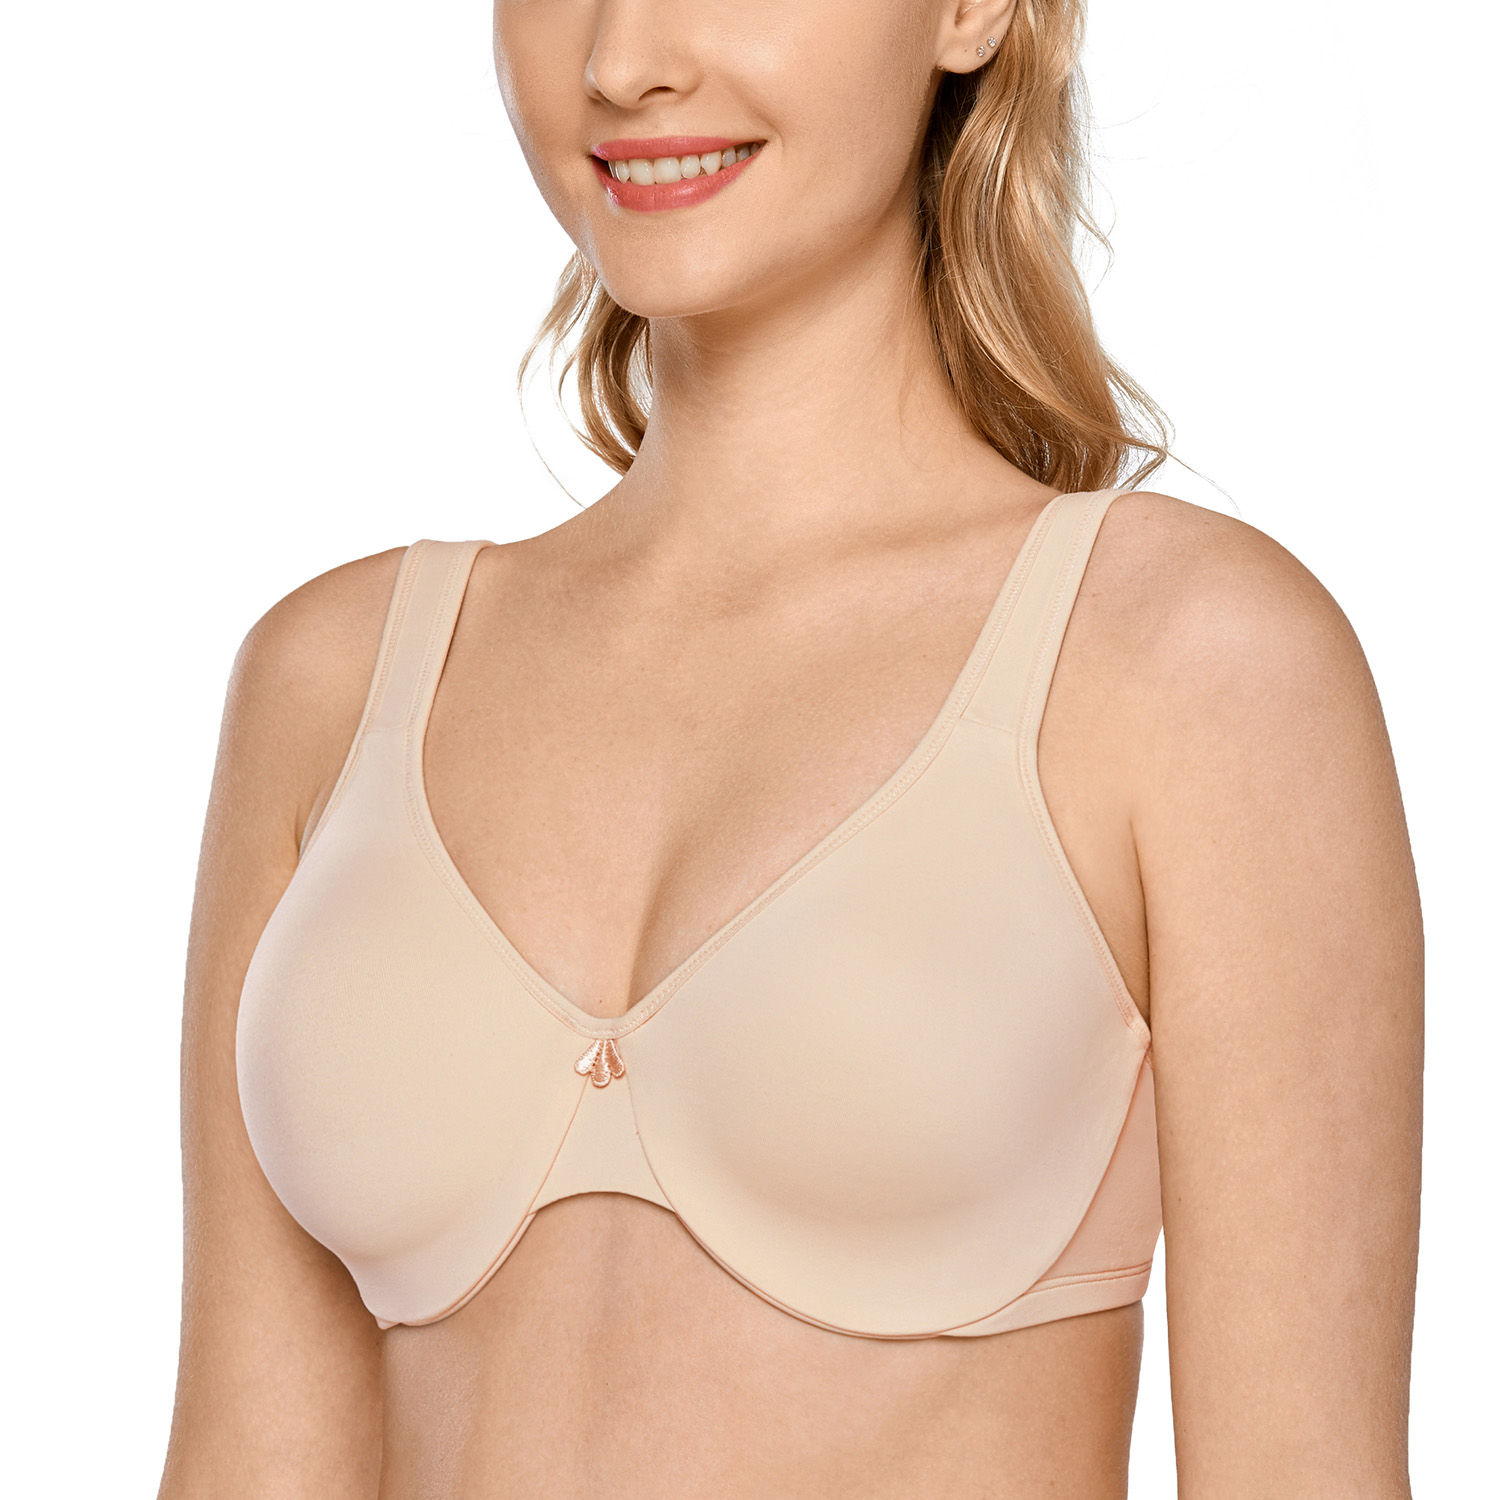 Delimira Womens Non-Padded Minimizer Bra Full Coverage Smooth Underwire Plus Size 